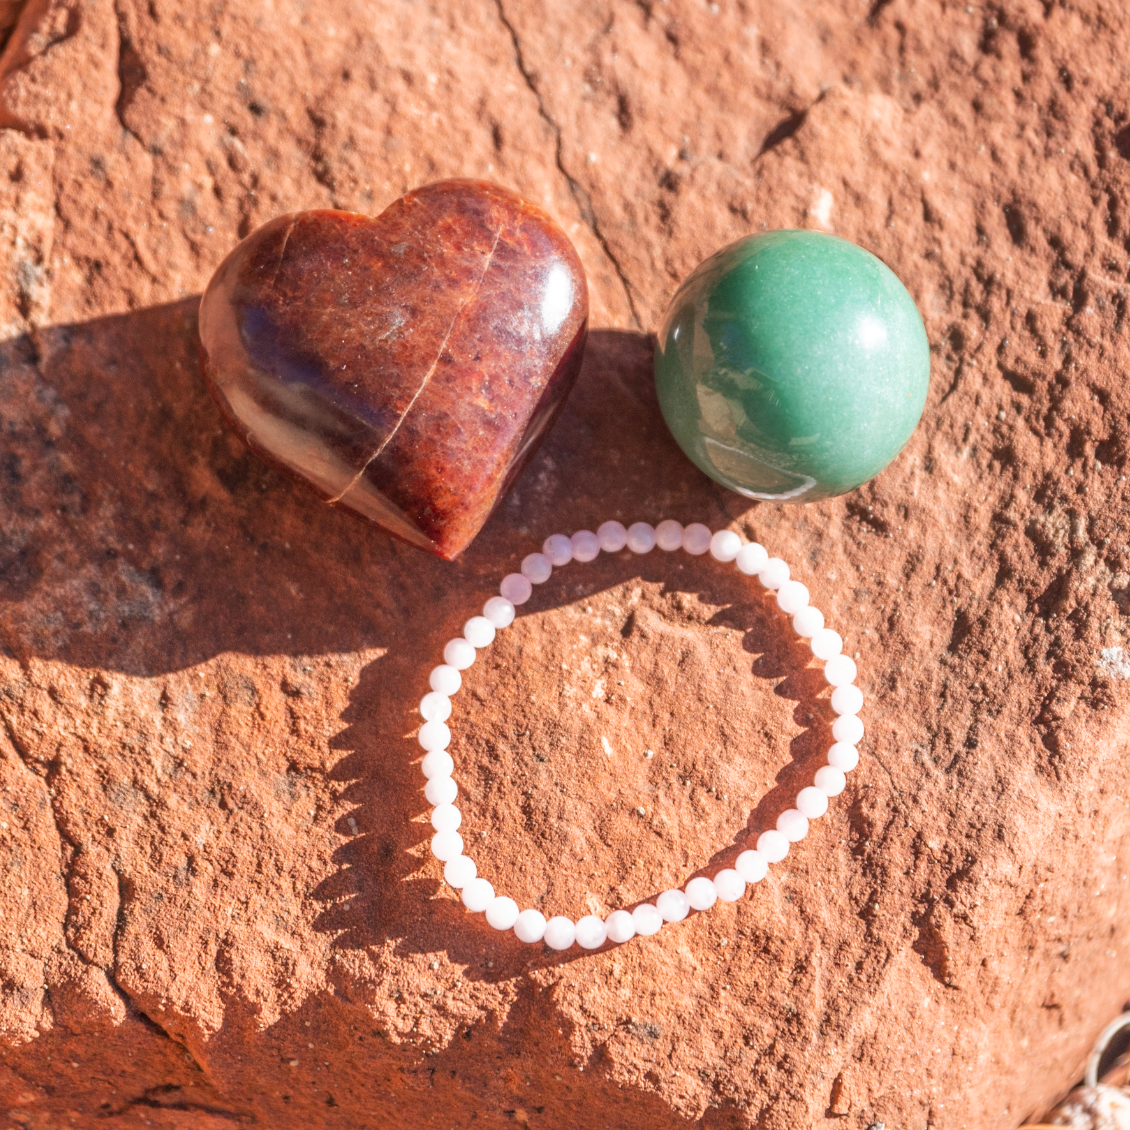 healing crystals: a bundle of crystals used for love in sedona, arizona